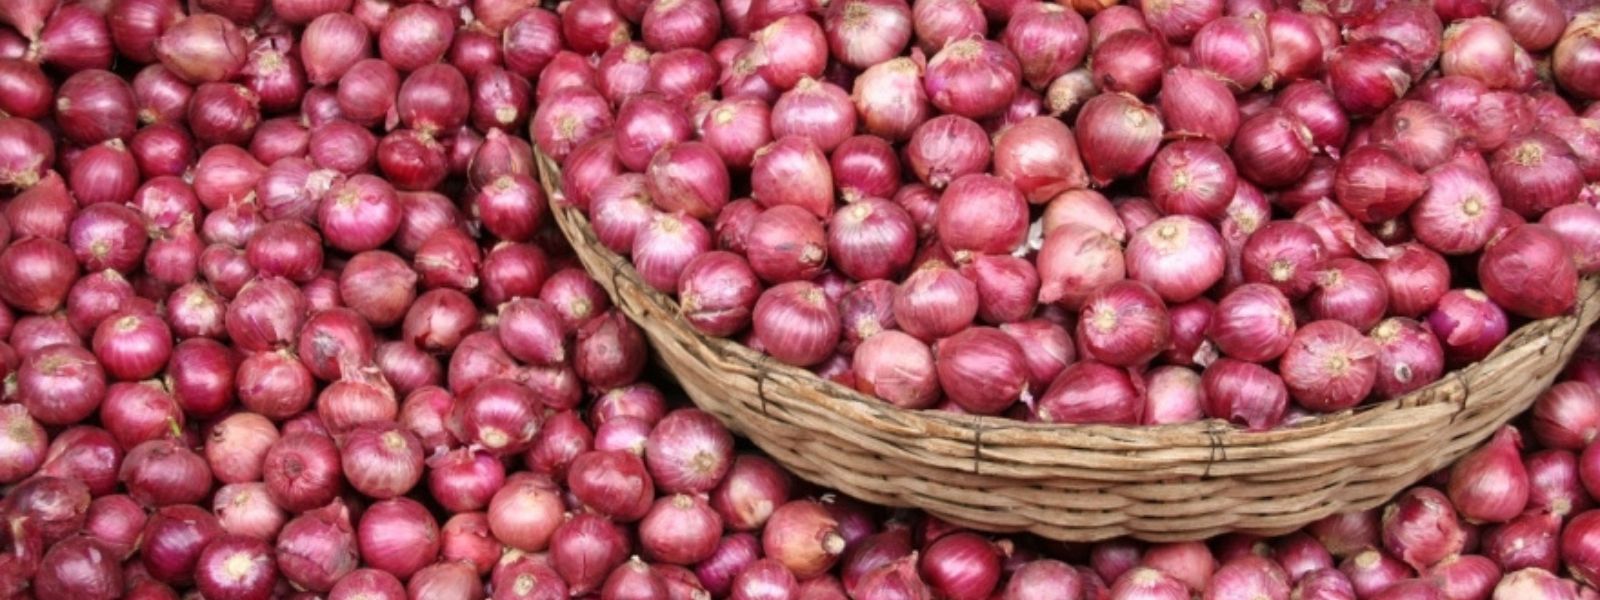 Permission granted to import 2,000MT of big onions